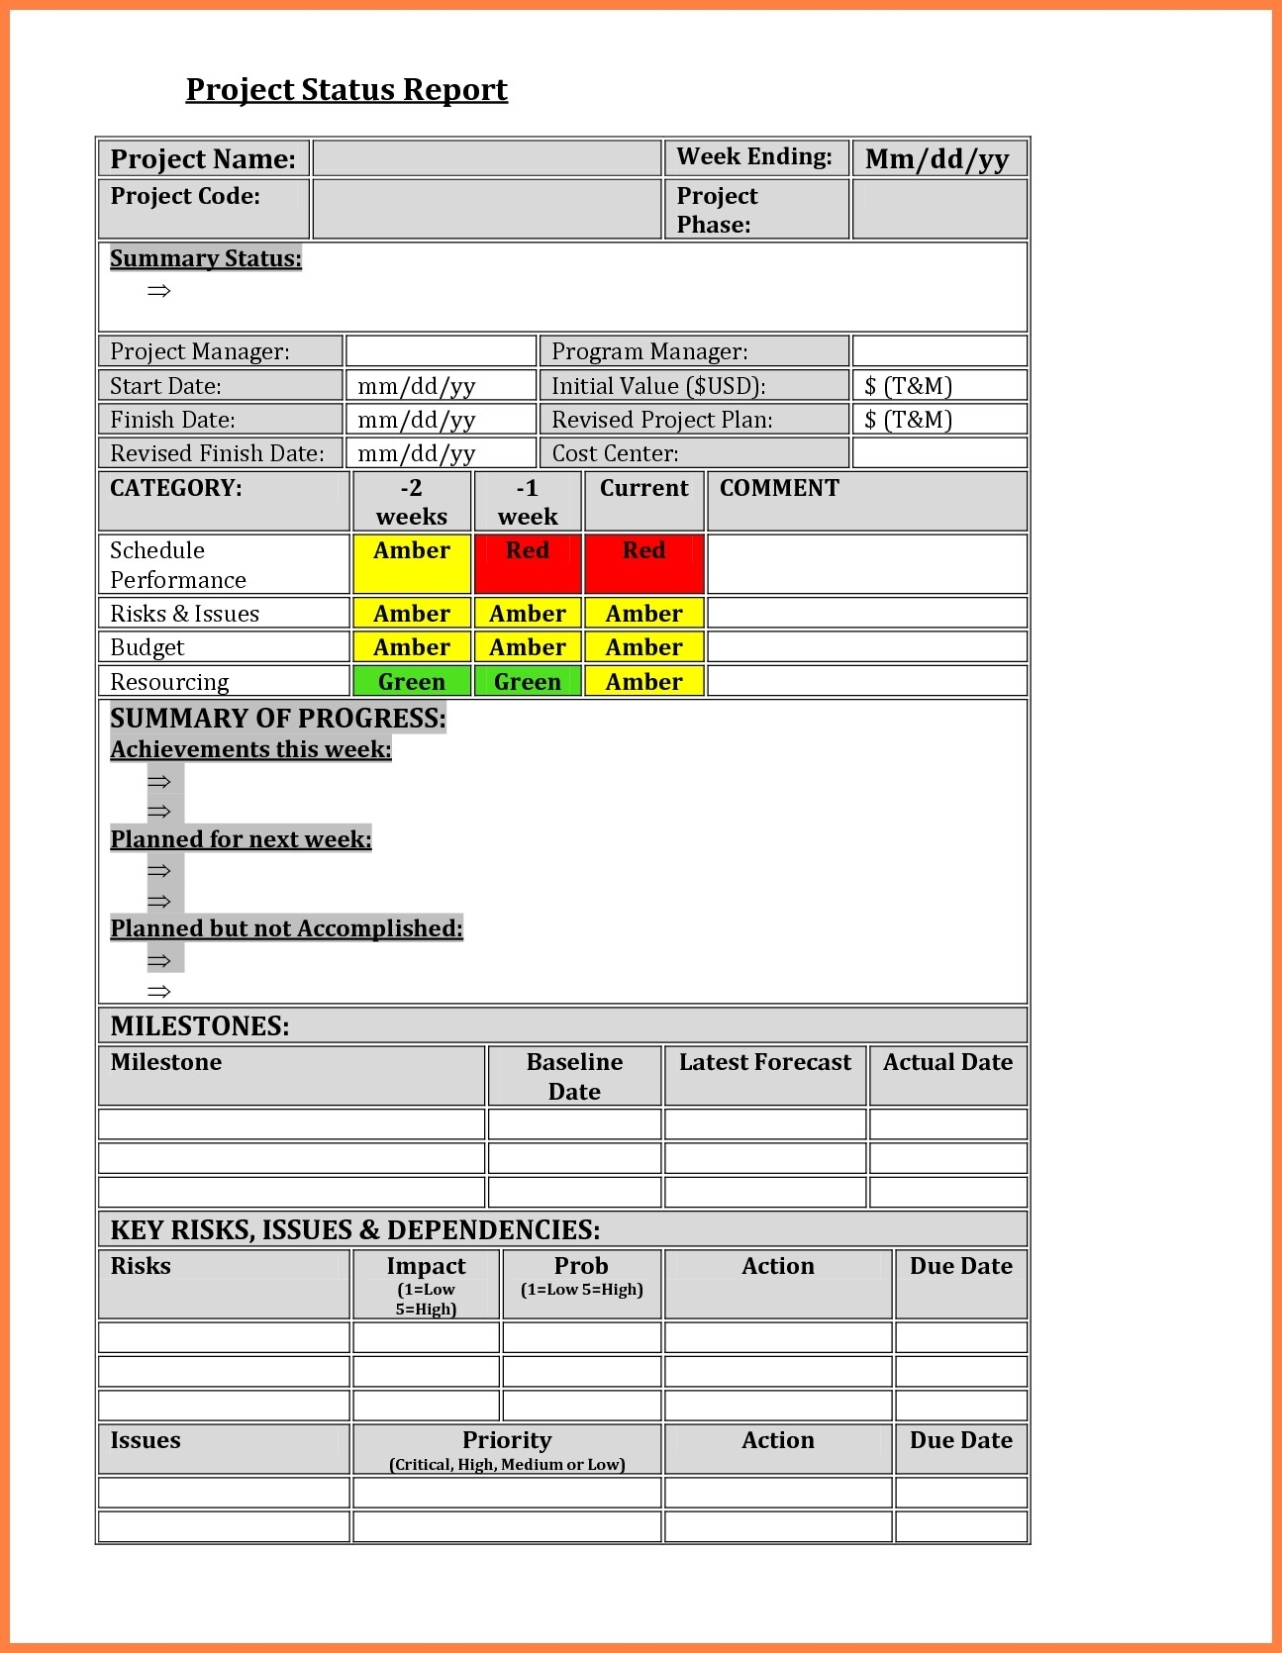 Weekly Status Report Template Excel | Qualads with regard to Project Weekly Status Report Template Excel